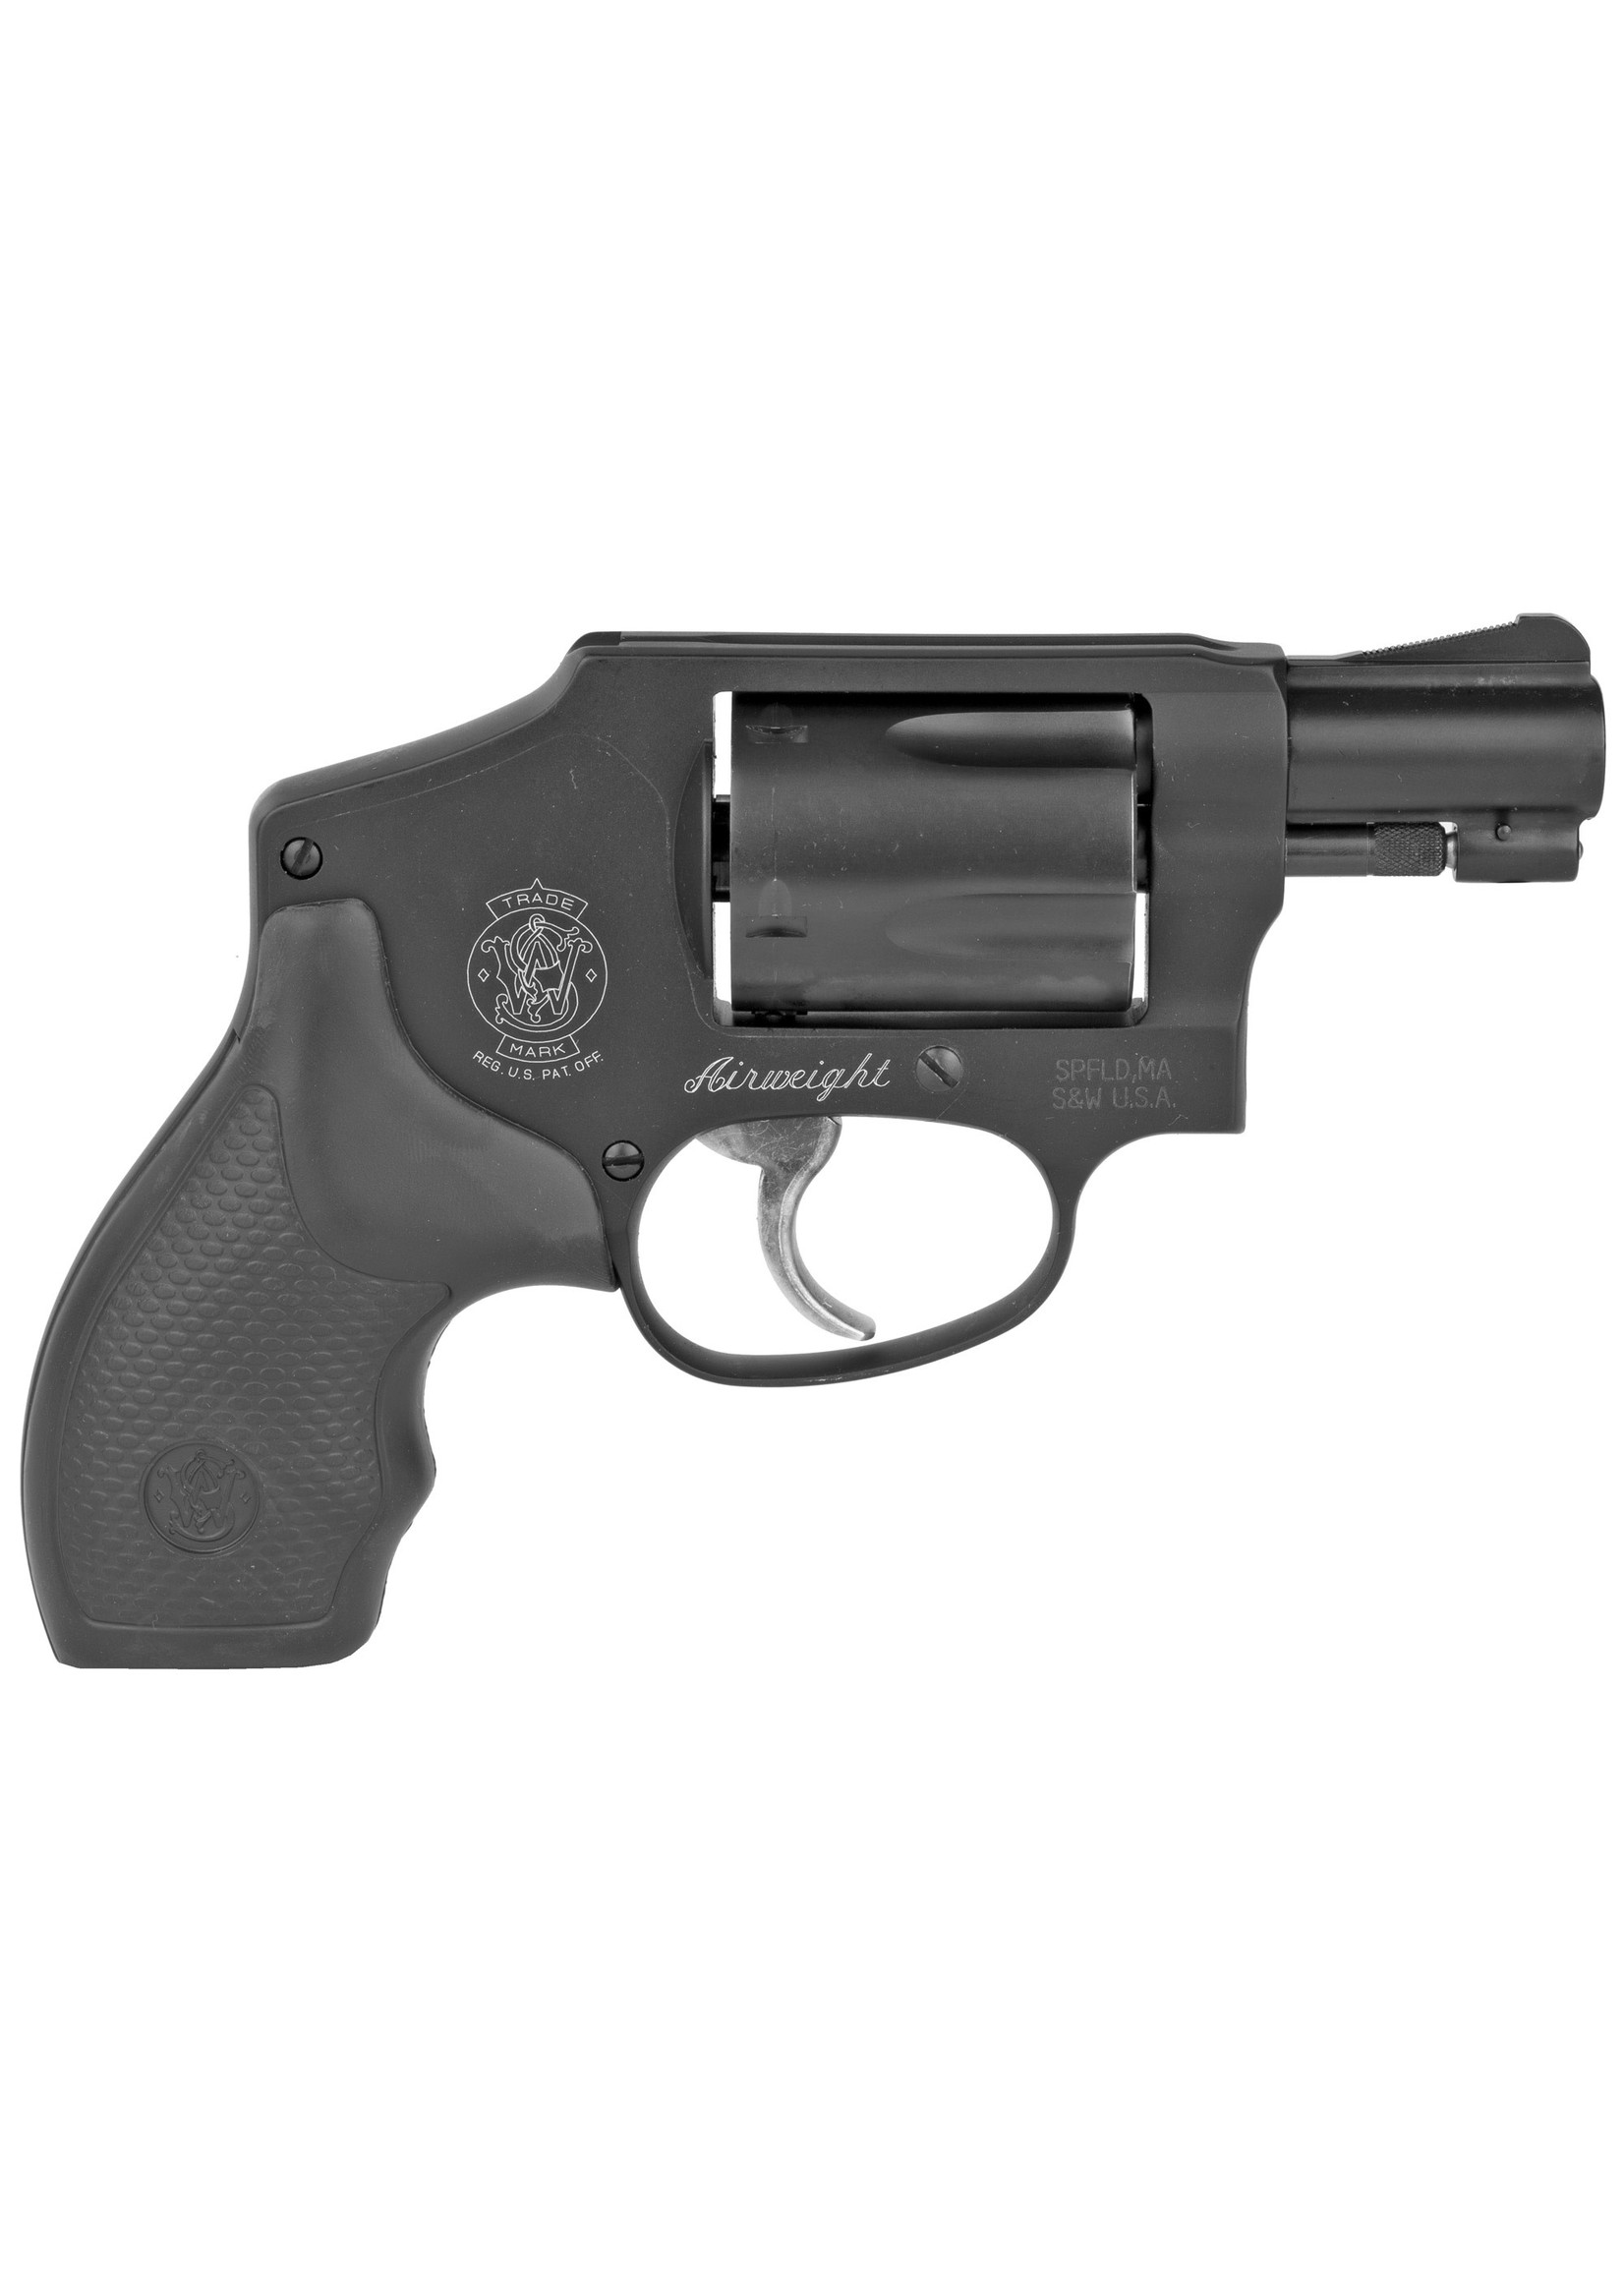 Smith and Wesson (S&W) Smith & Wesson 442 Airweight 38 Spl +P 5rd ,1.88", Black Aluminum, Black Polymer Grip